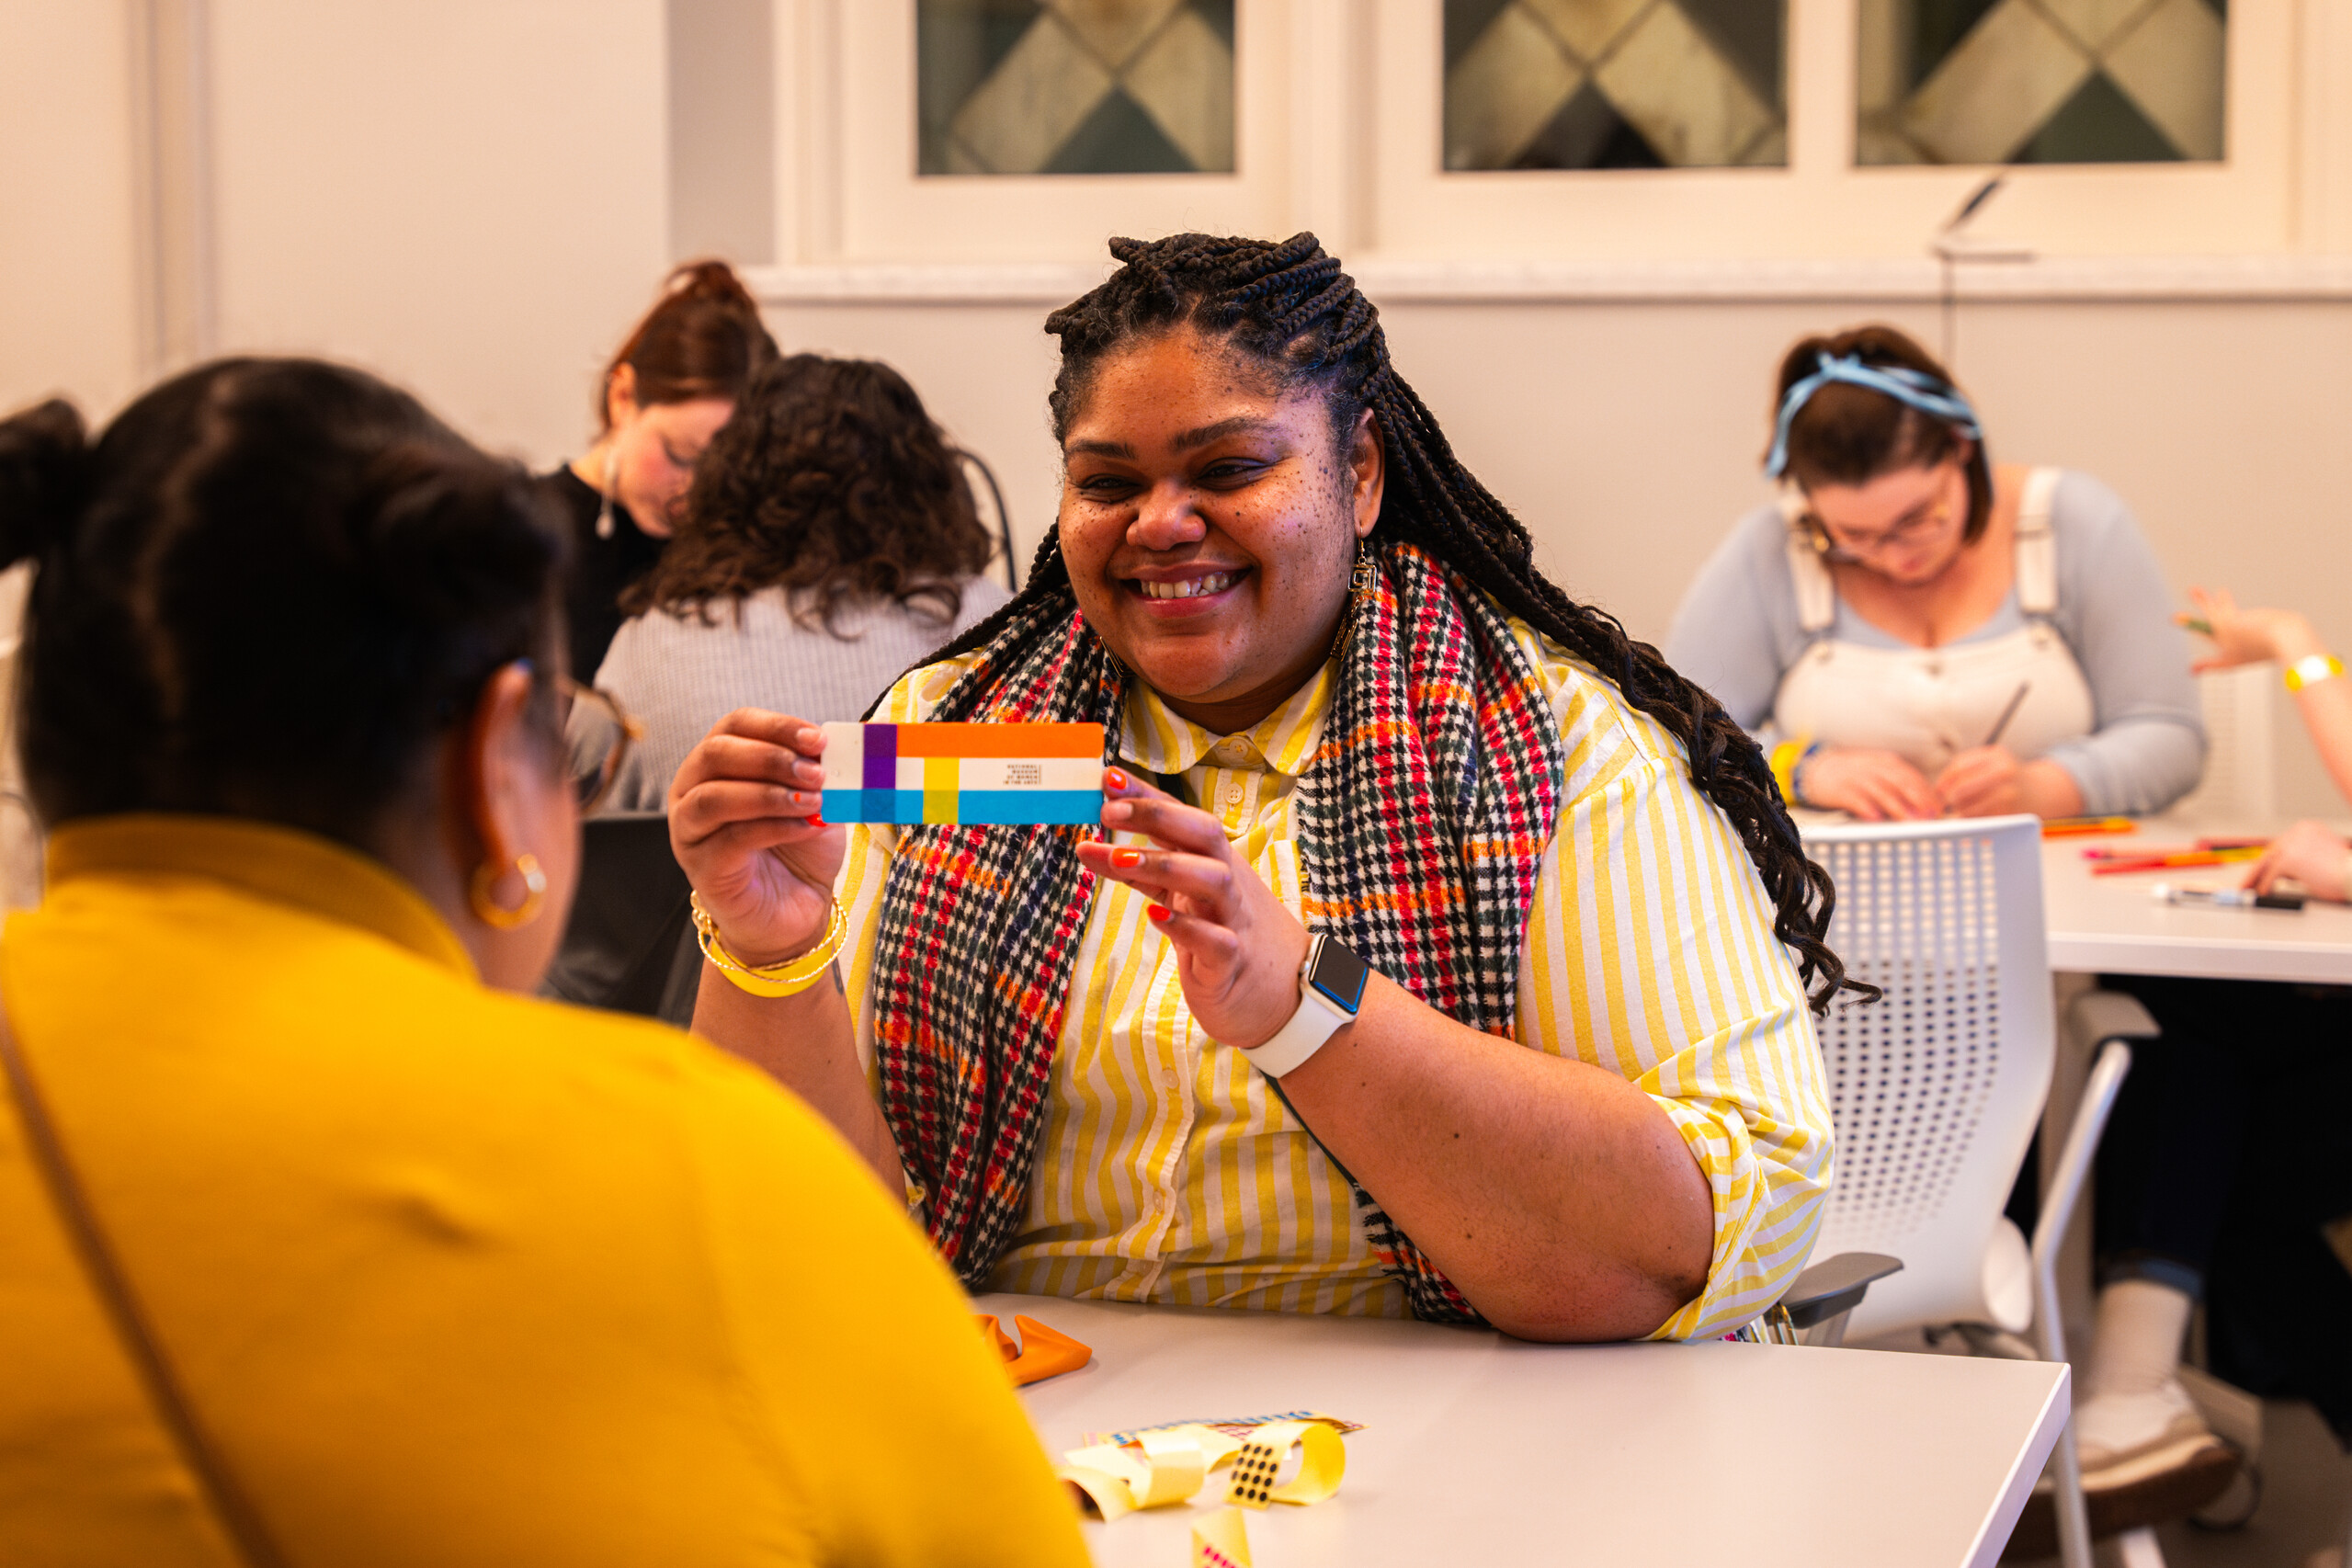 A woman with dark colored skin sits at a grey table. She wears a white and yellow striped sweater and a black, red, and orange plaid scarf. She holds a striped bookmark and smiles at a person across the table from her.